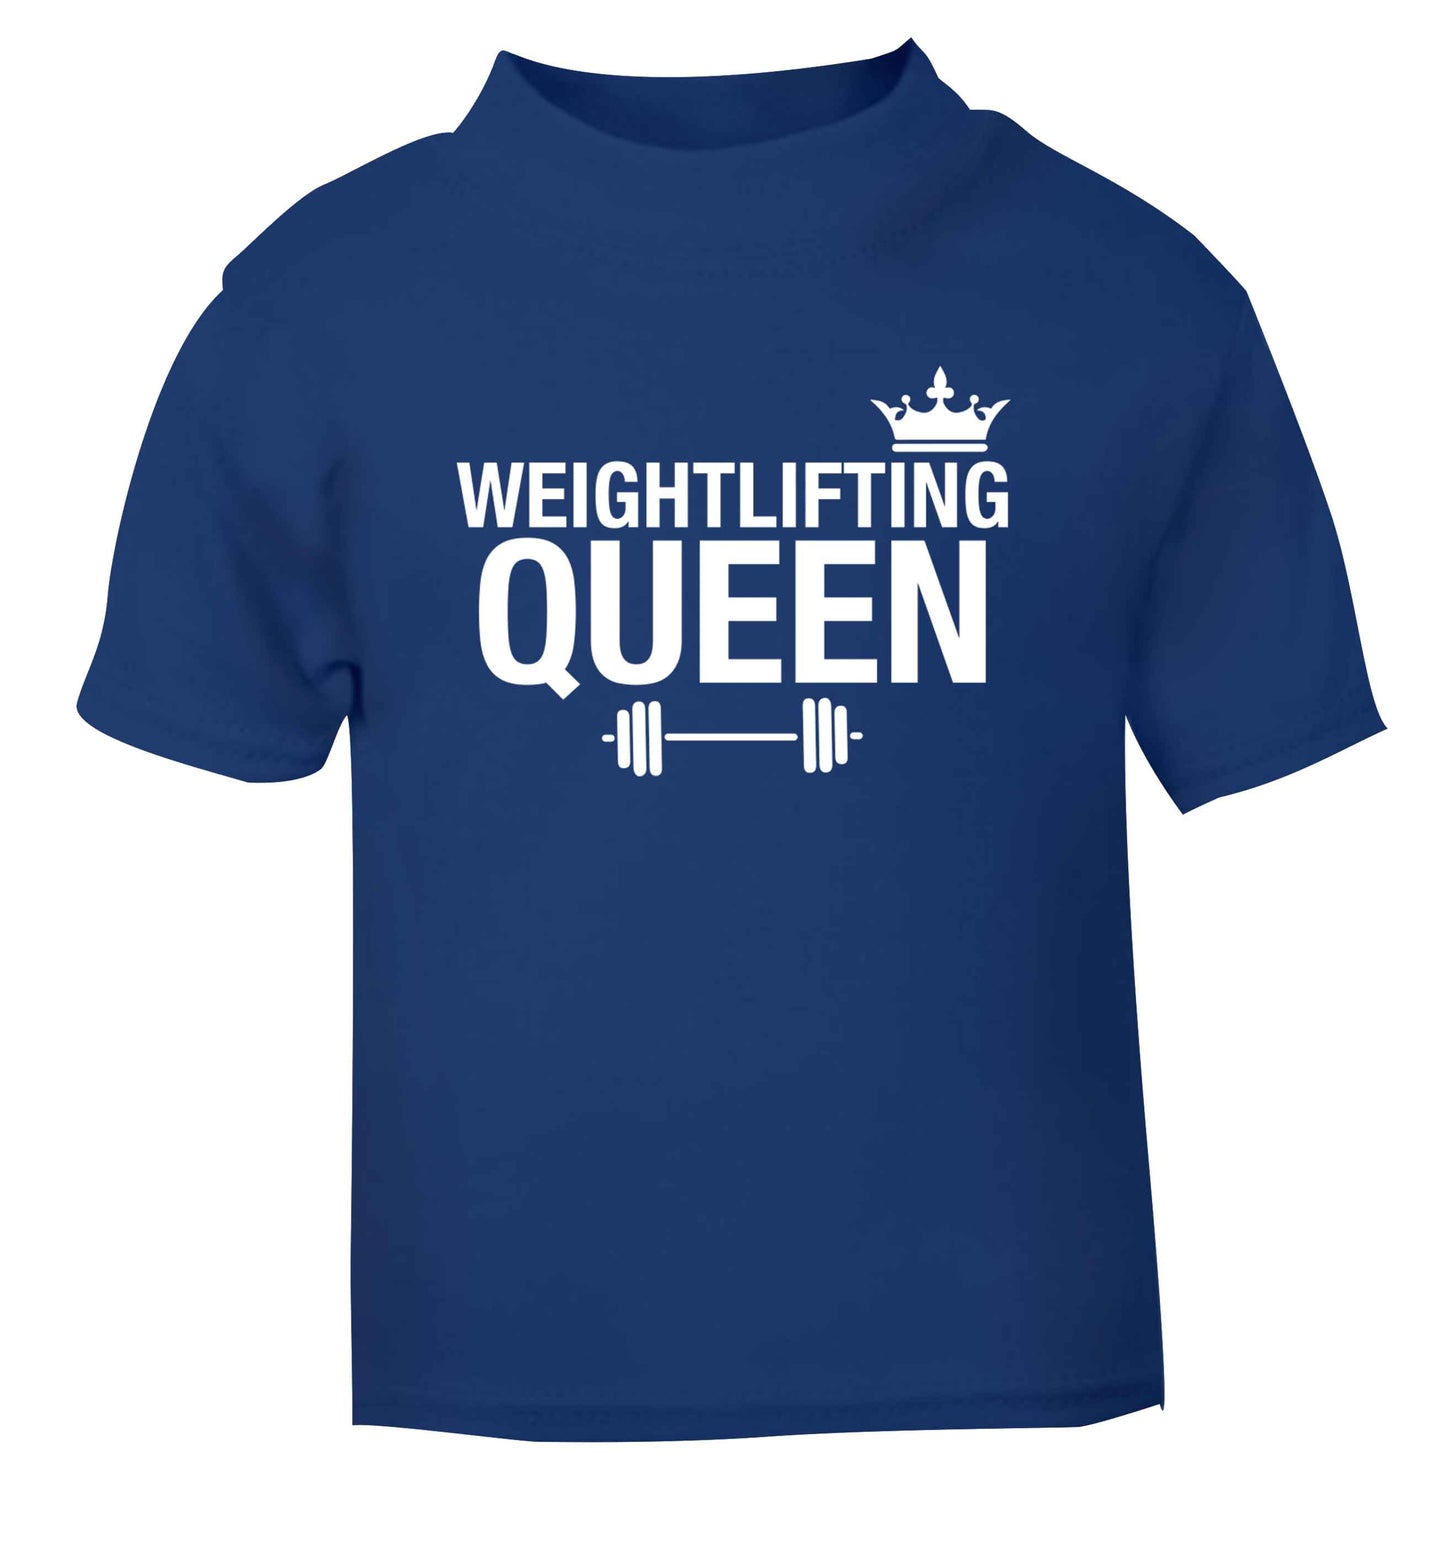 Weightlifting Queen blue Baby Toddler Tshirt 2 Years